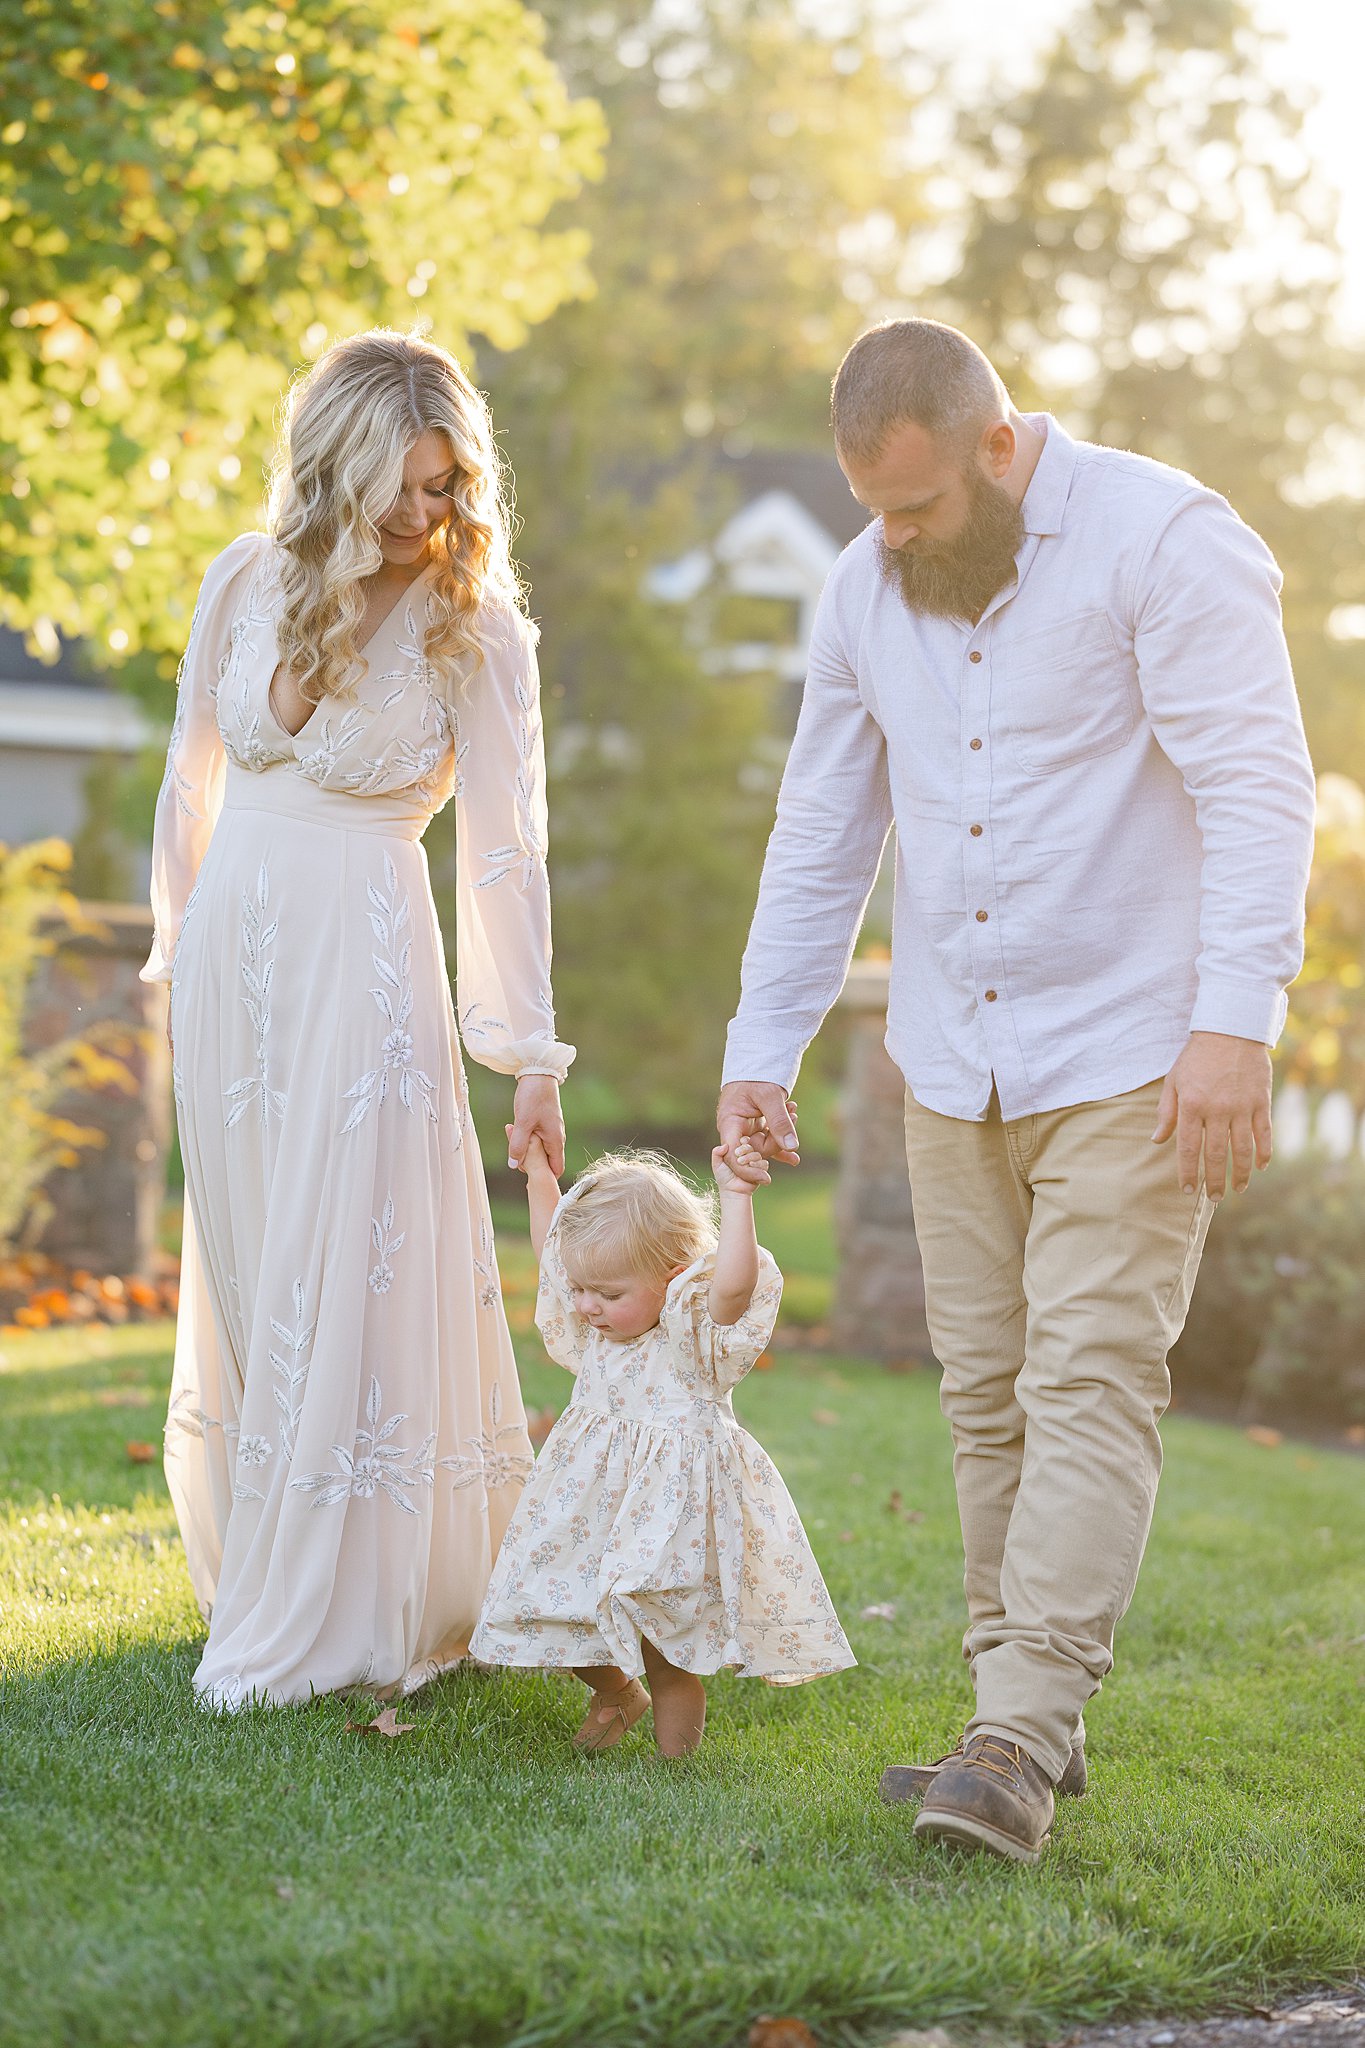 Happy parents walk through a garden lawn at sunset holding hands with their toddler daughter in a dress thanks to Indianapolis OBGYN